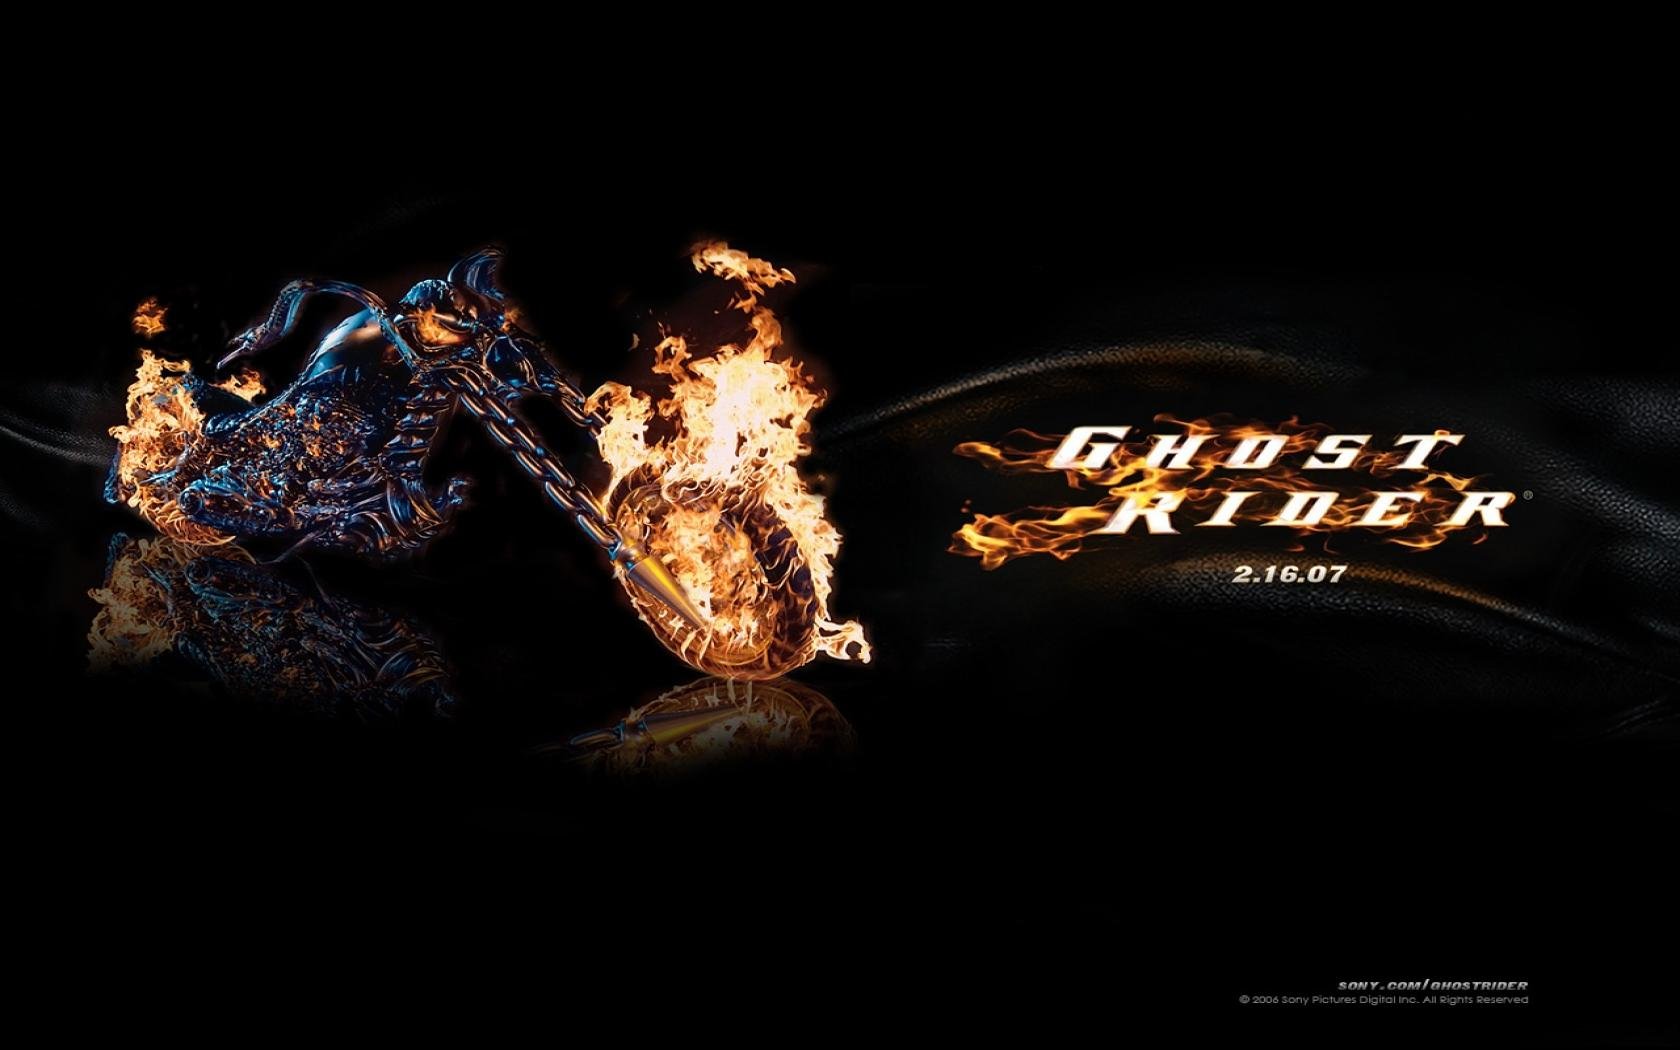 Free download Ghost Rider HD Wallpaper for all resolution HD 1680x1050 Movie [1680x1050] for your Desktop, Mobile & Tablet. Explore Ghost Rider HD Wallpaper. Ghost Rider Wallpaper, Ghost Rider